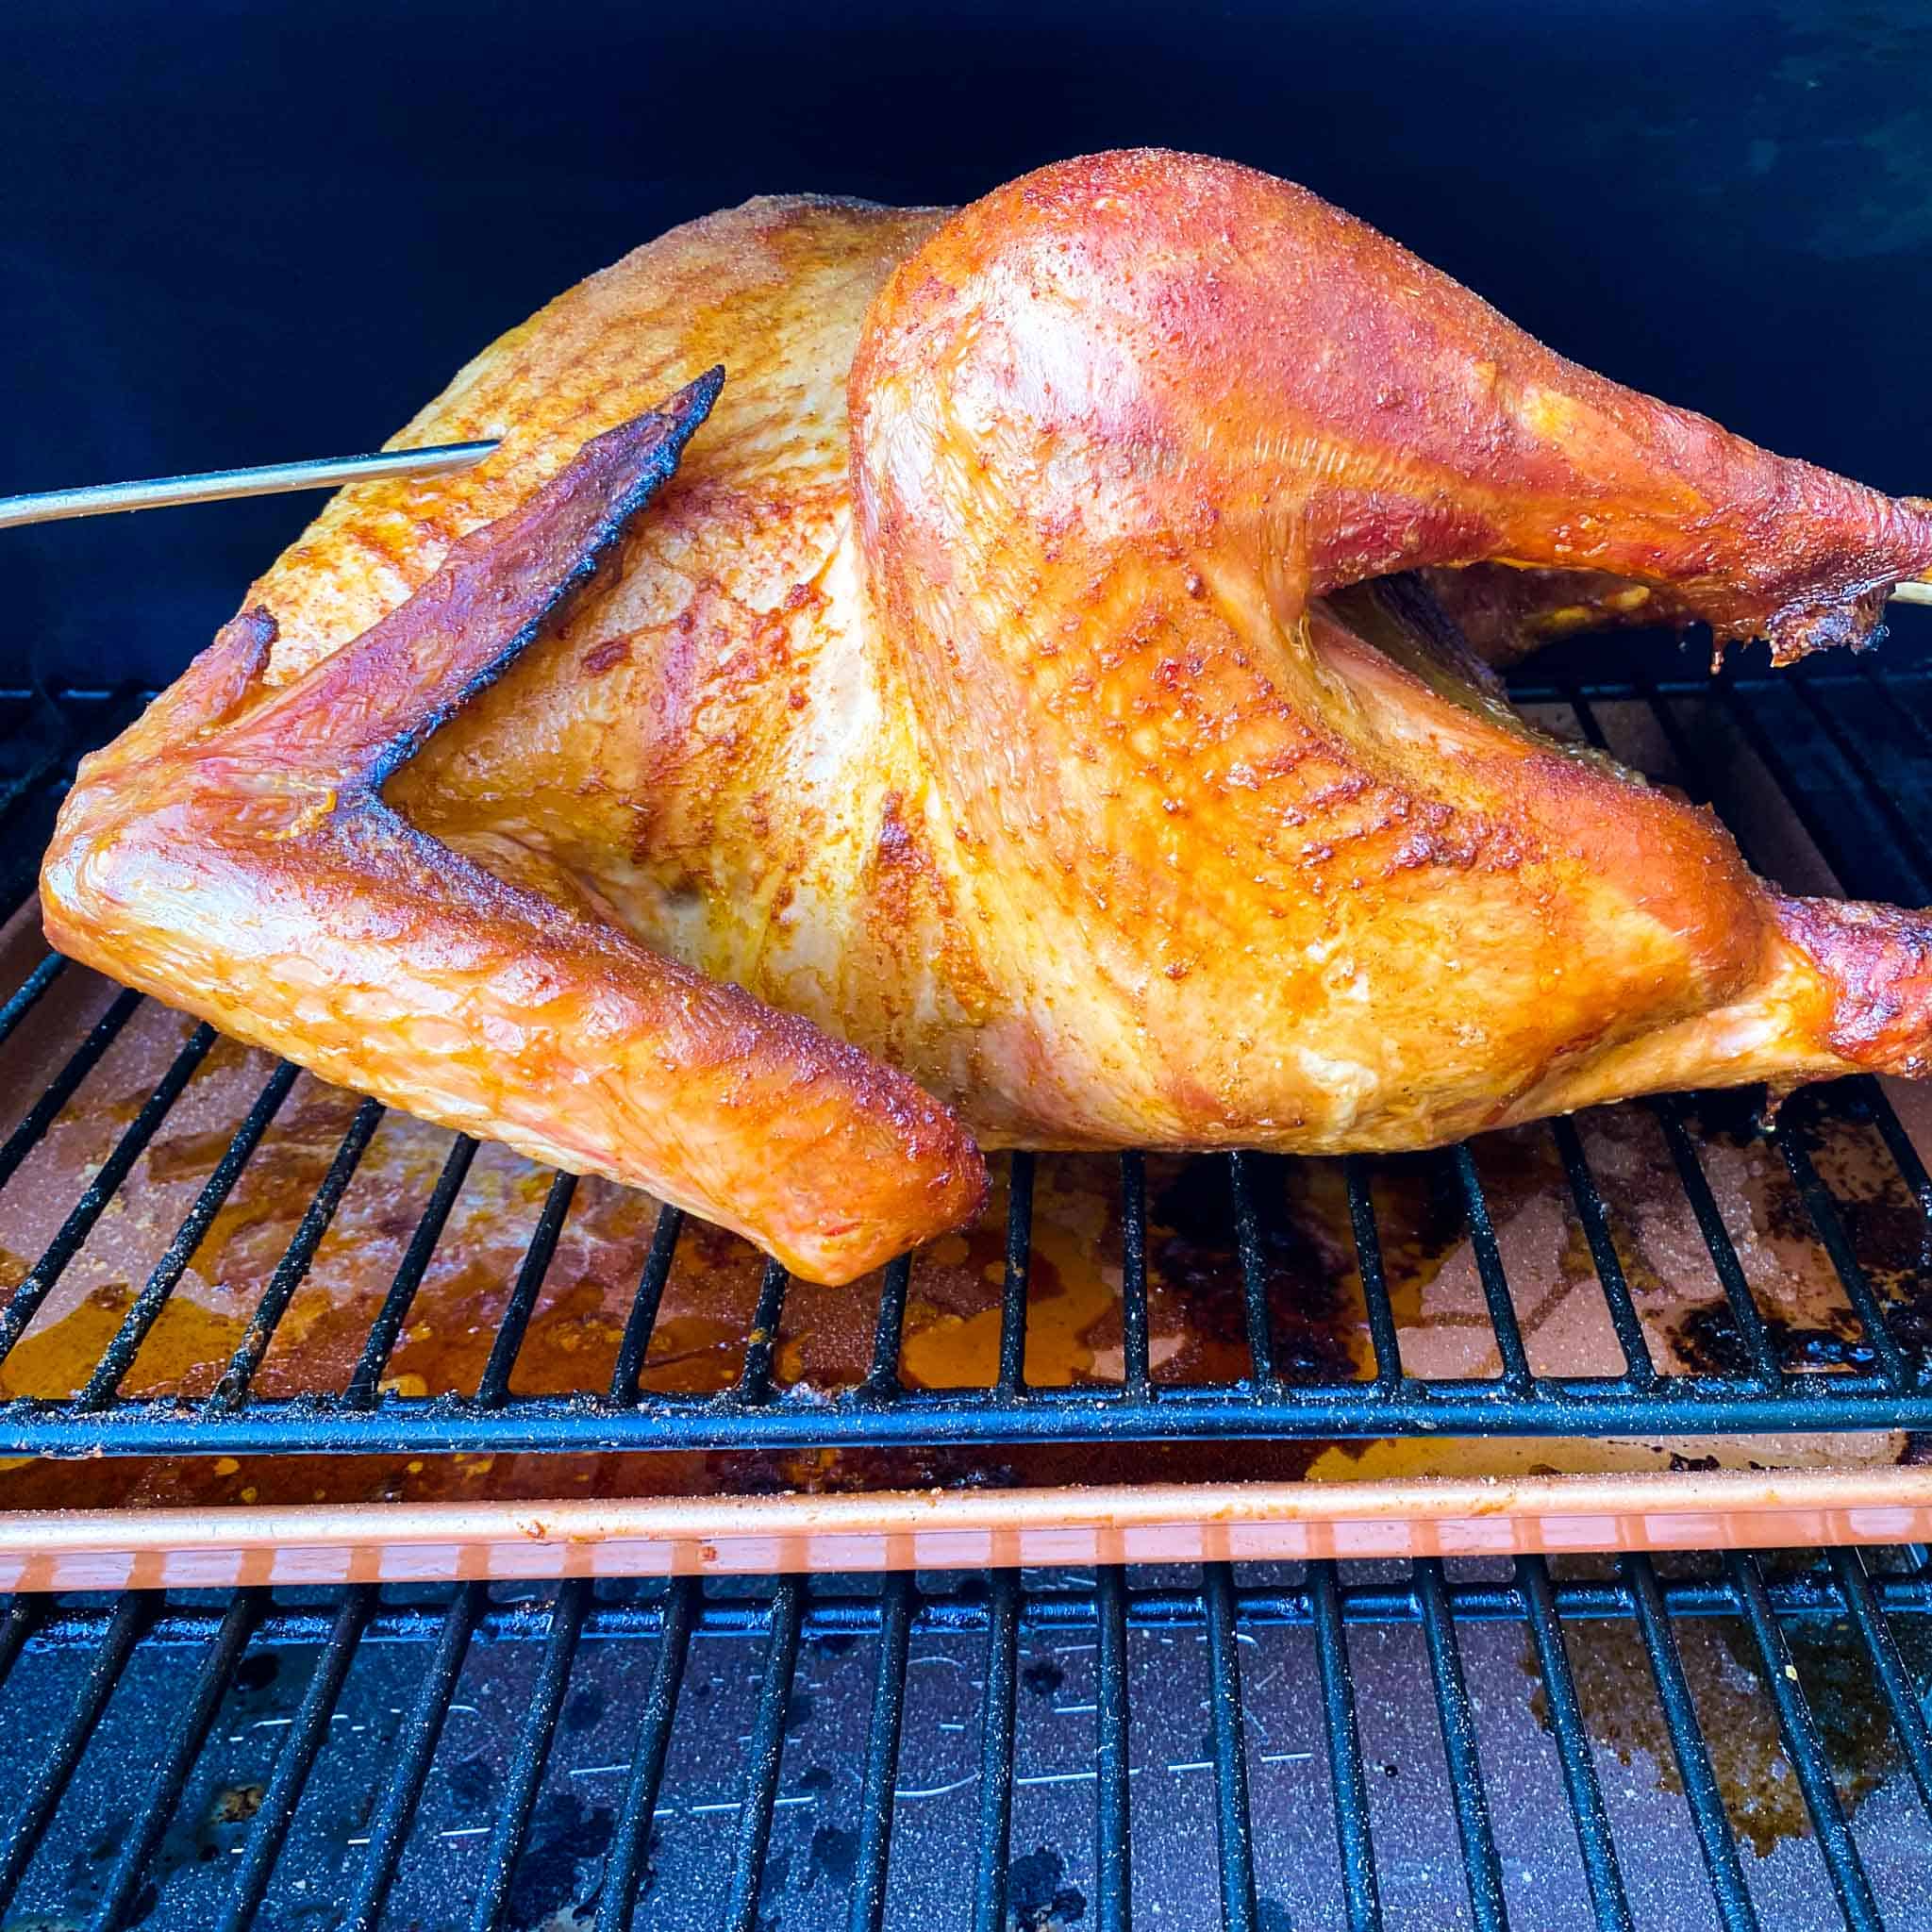 Smoked Turkey sitting on a traeger pellet grill with a meat probe inserted.